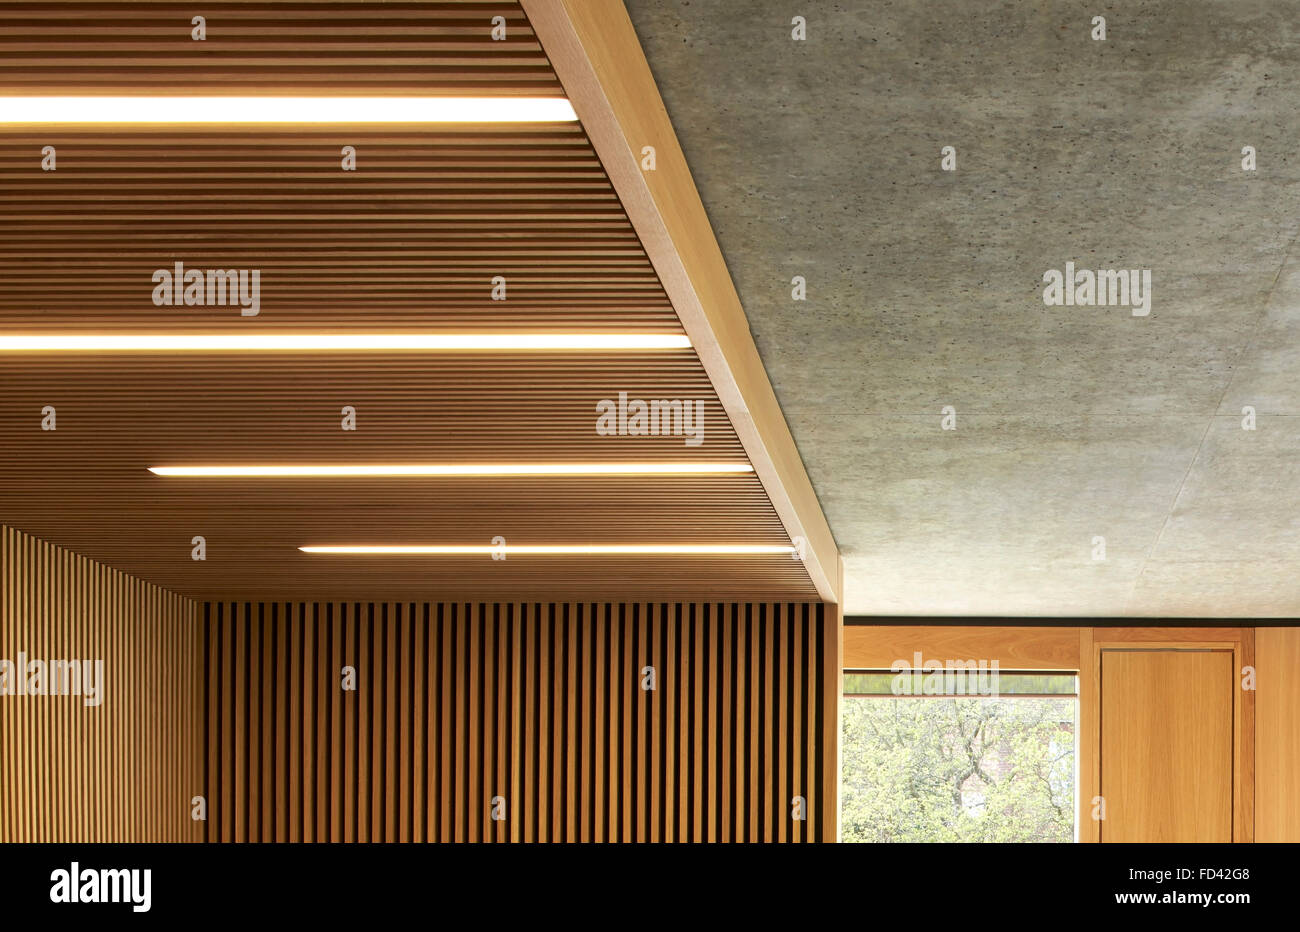 Timber lining and concrete ceiling soffit. Britten-Pears Archive, Aldeburgh, United Kingdom. Architect: Stanton Williams, 2013. Stock Photo